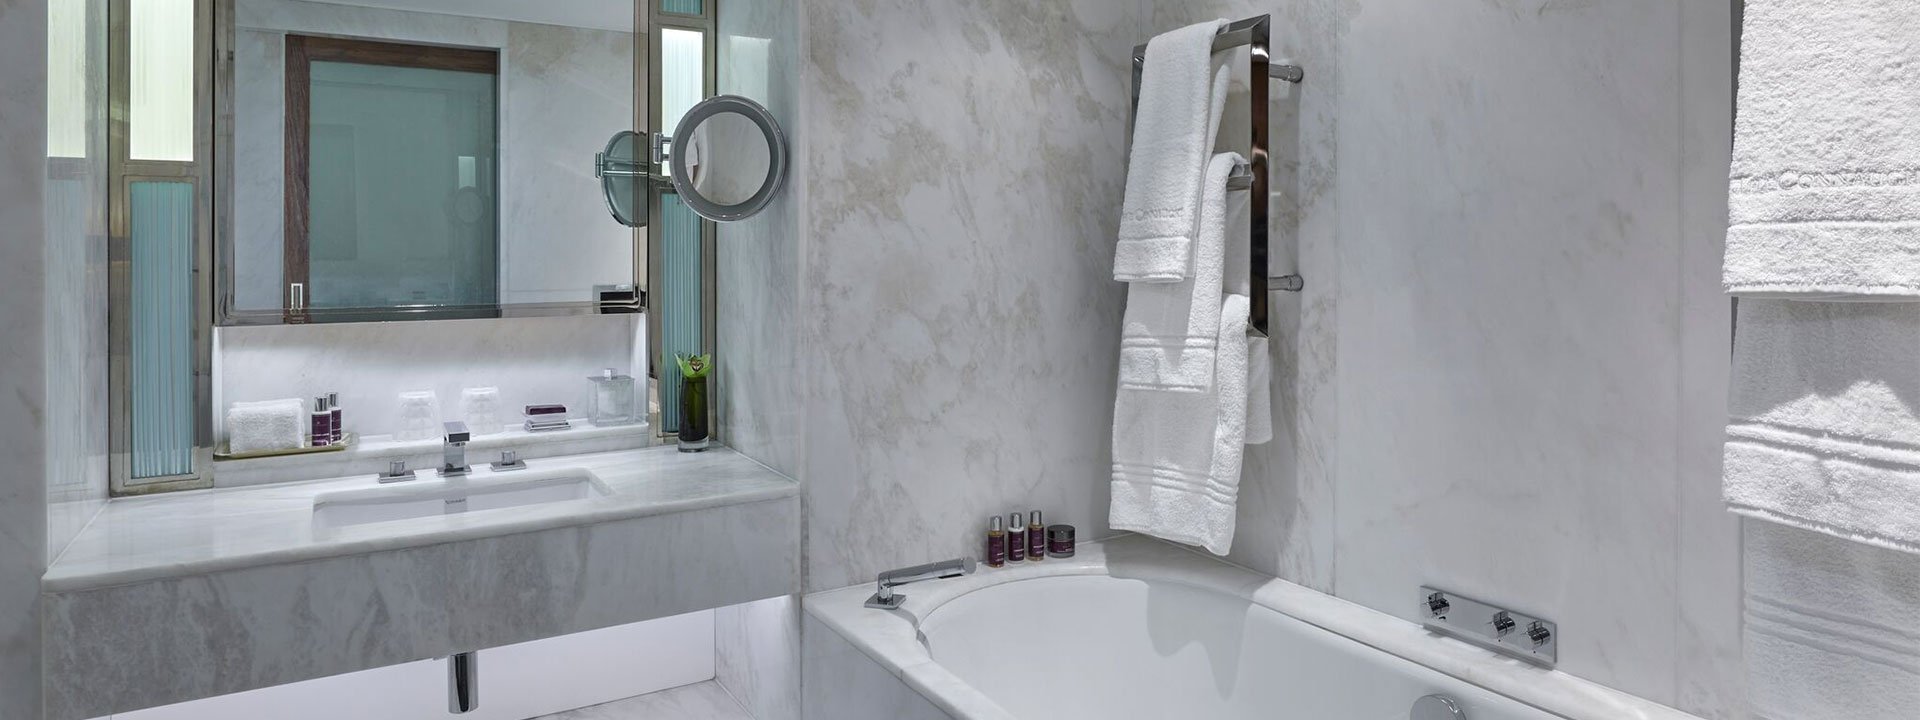 View of the Contemporary Superior Room's marble bathroom, complete with towels and amenities.